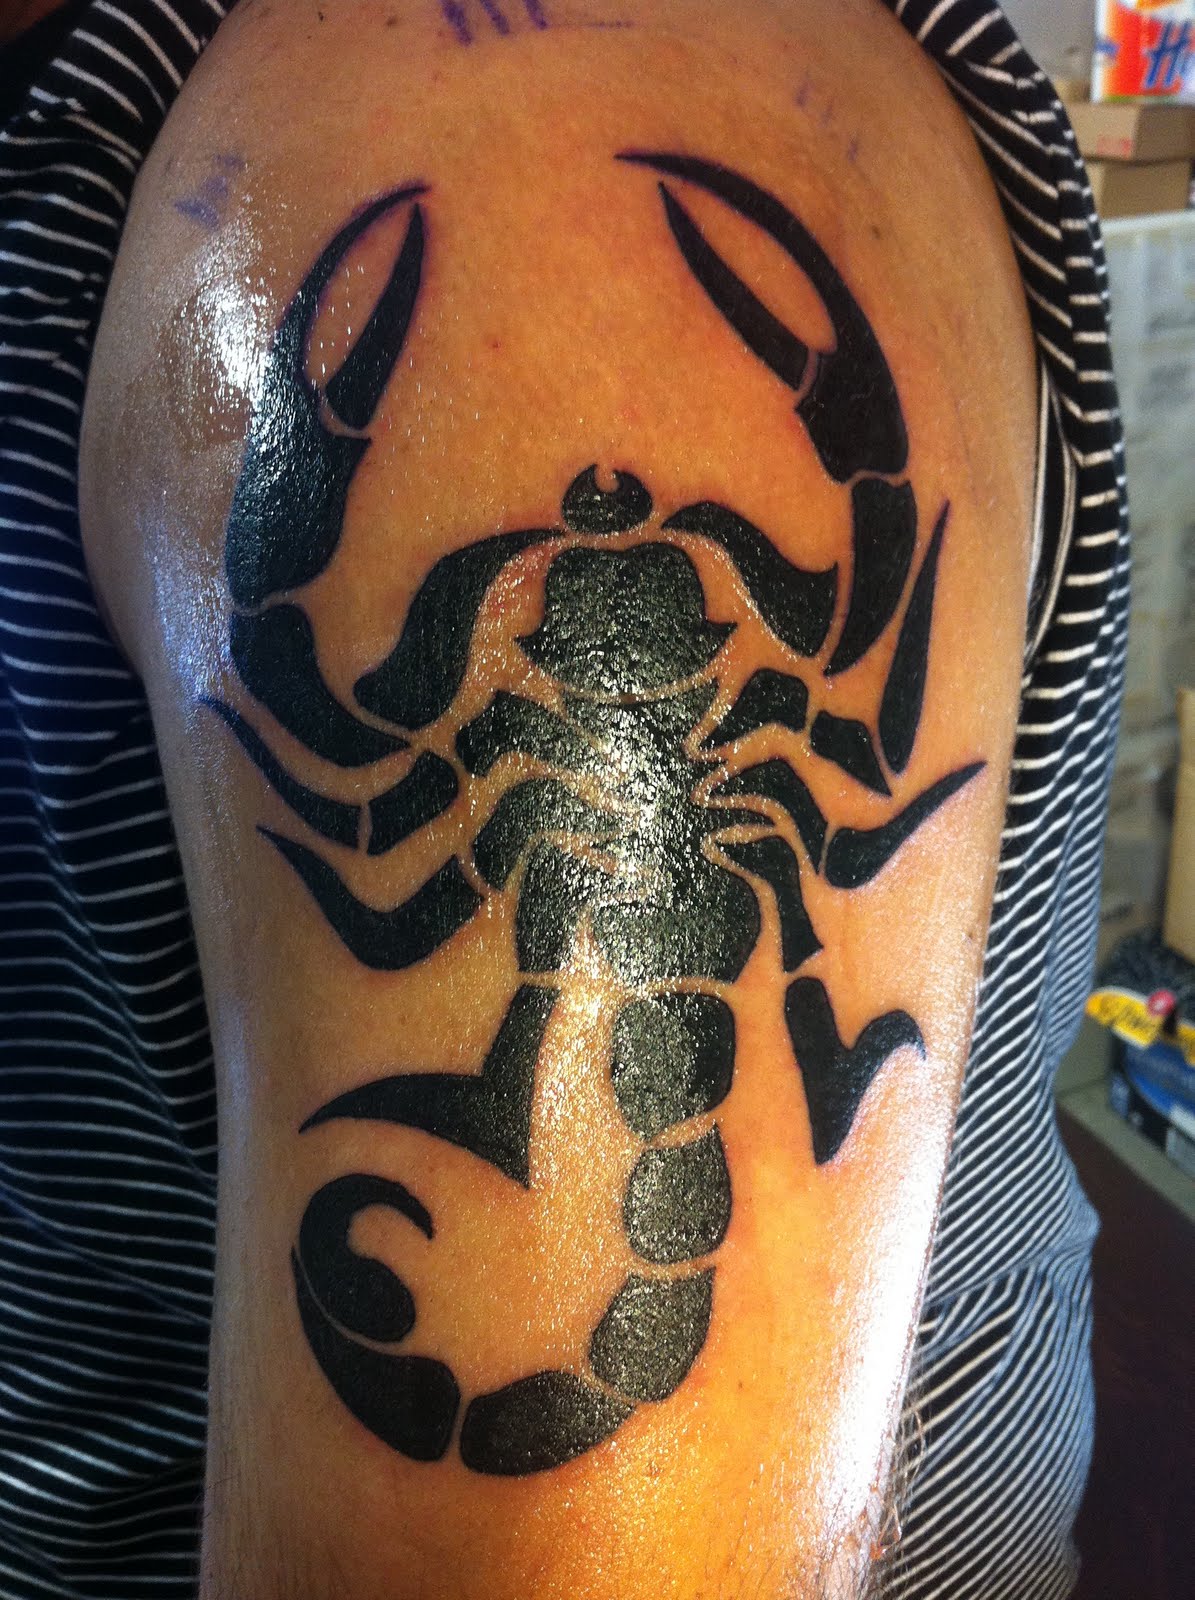  Scorpio Tattoos Designs Ideas and Meaning Tattoos For You